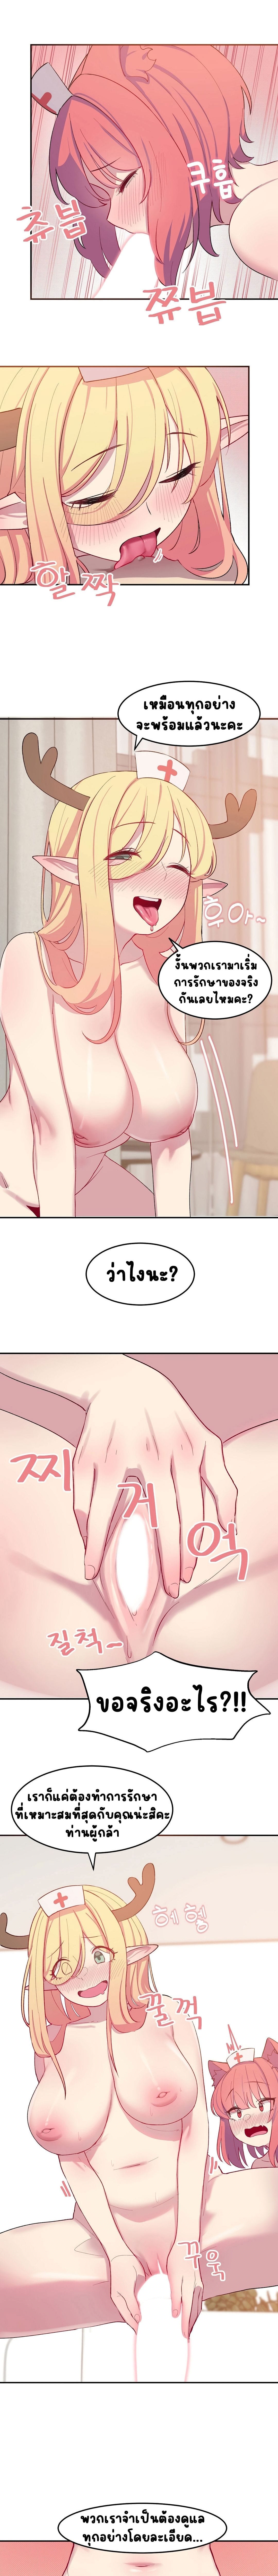 Hospitalized Life in Another World ตอนที่ 2 ภาพ 5